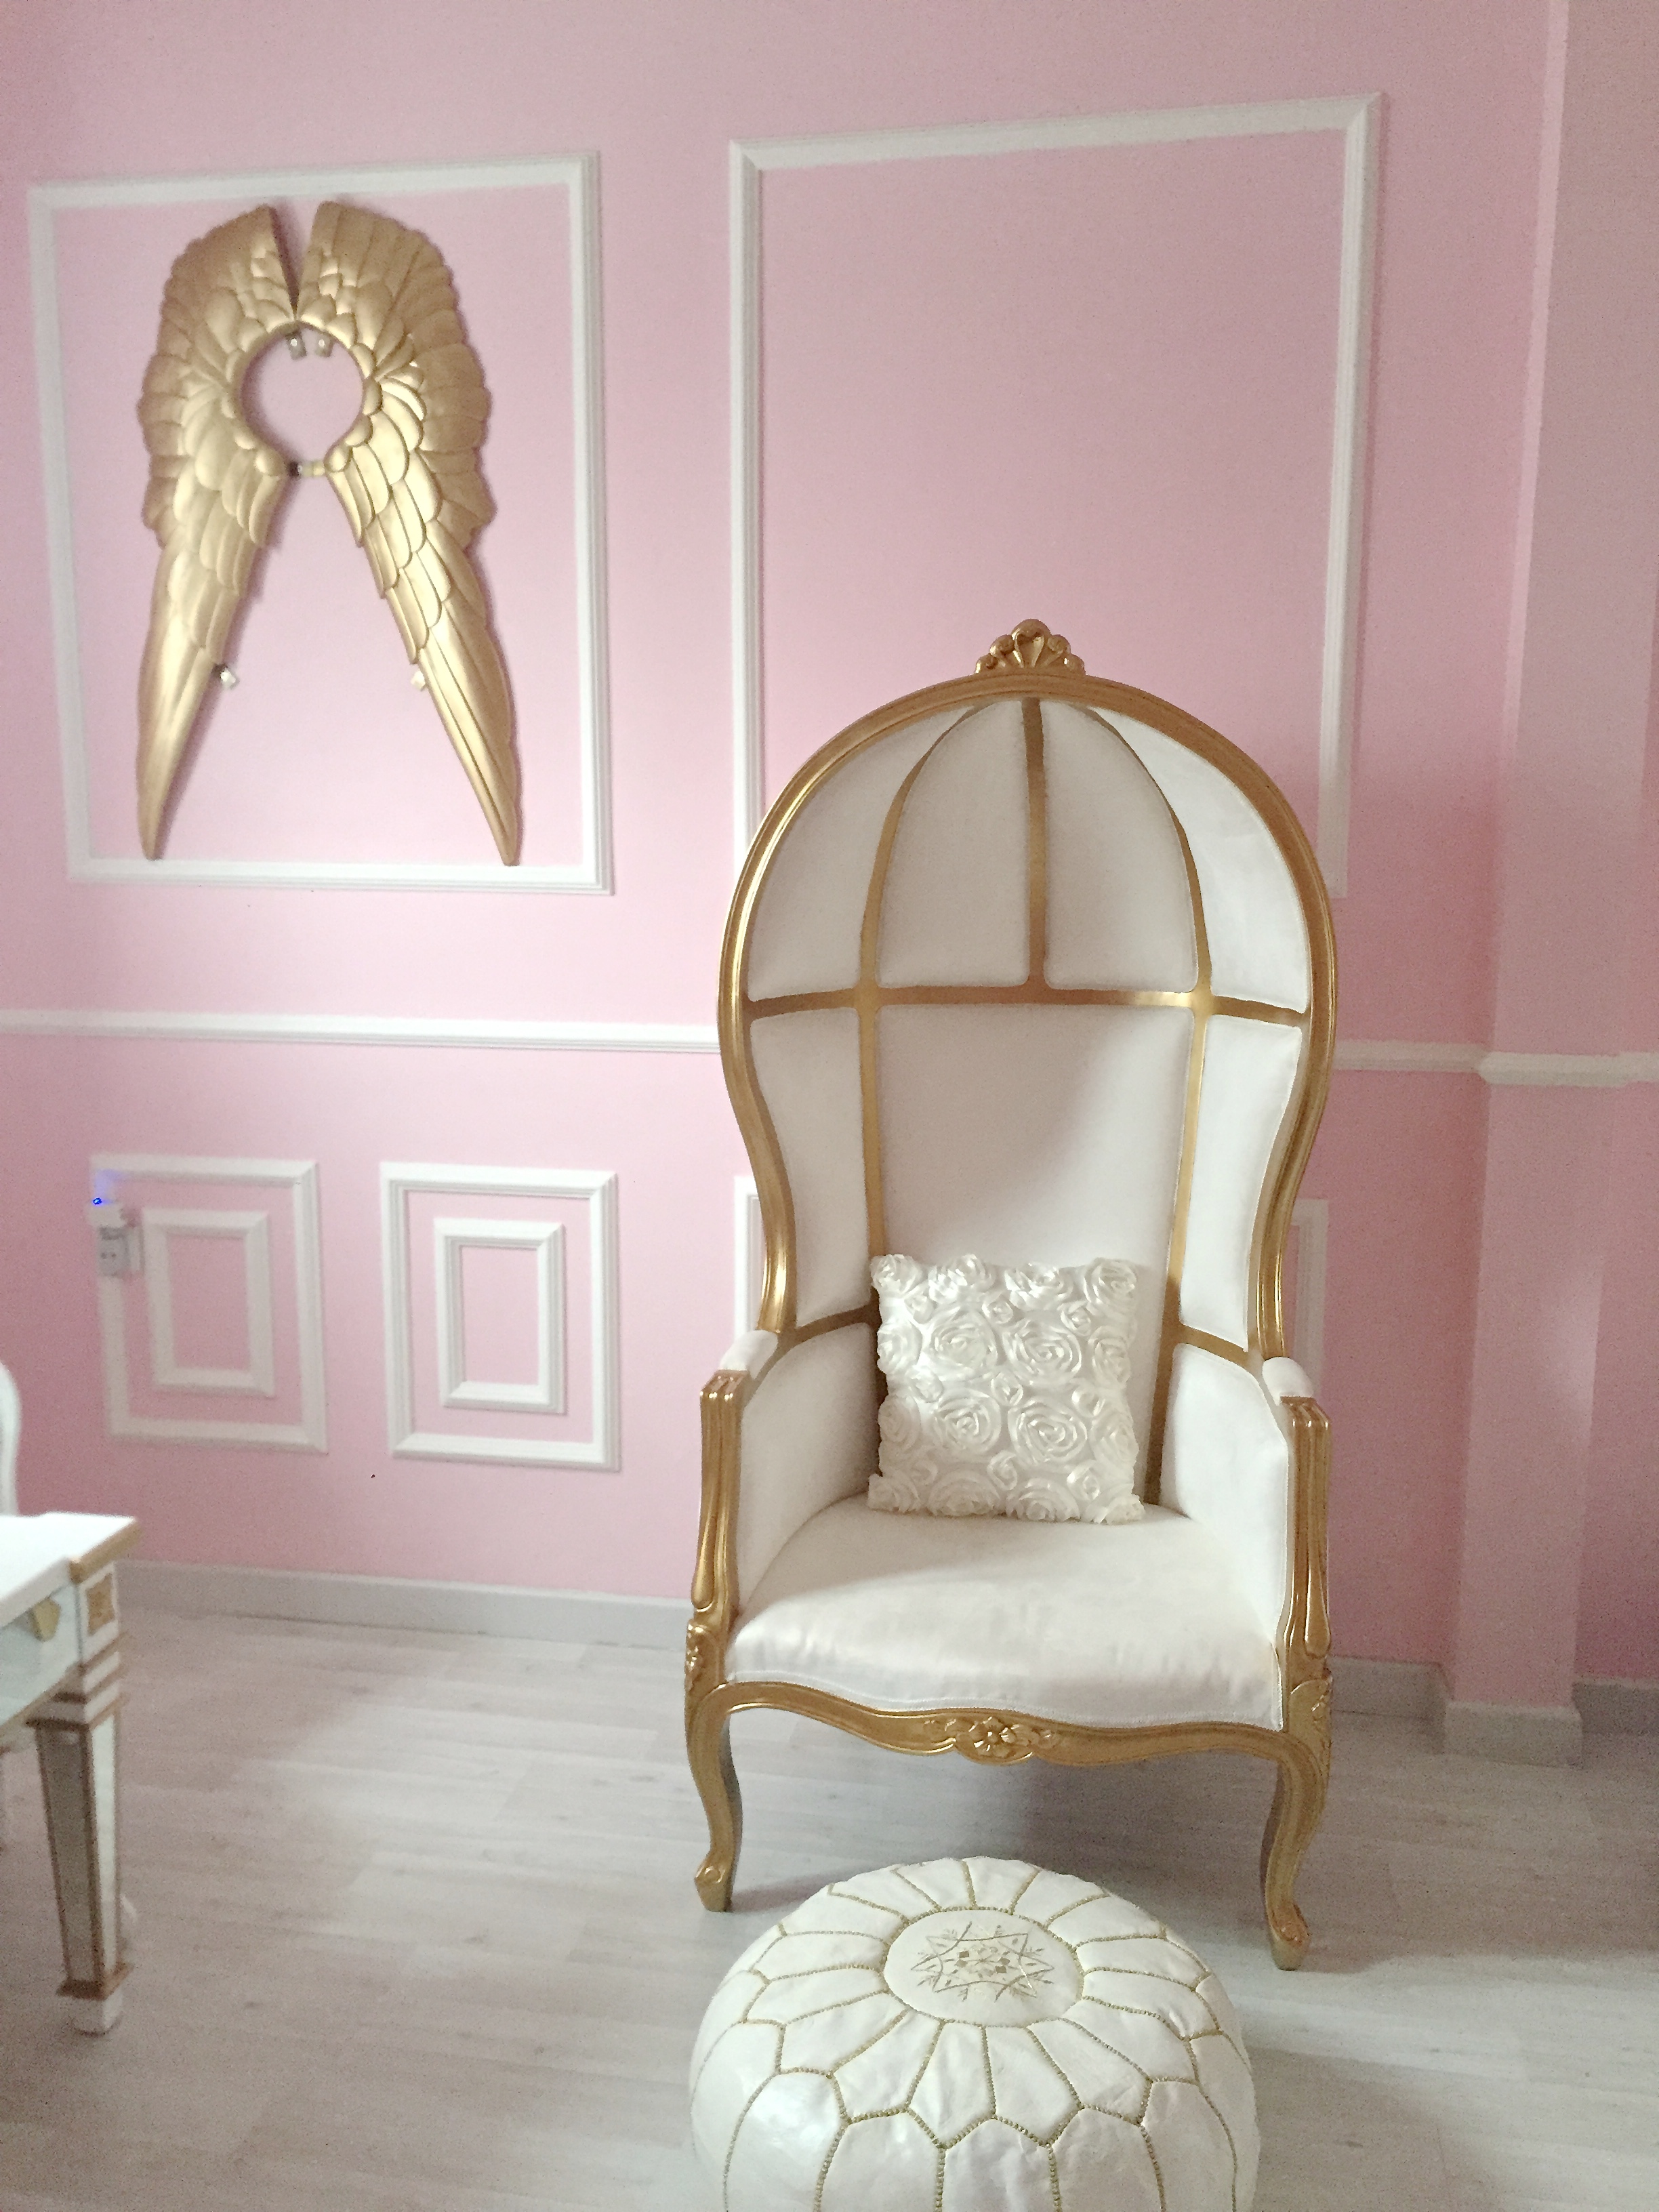 Custom White and Gold Potter Chair in this Parisian Nursery